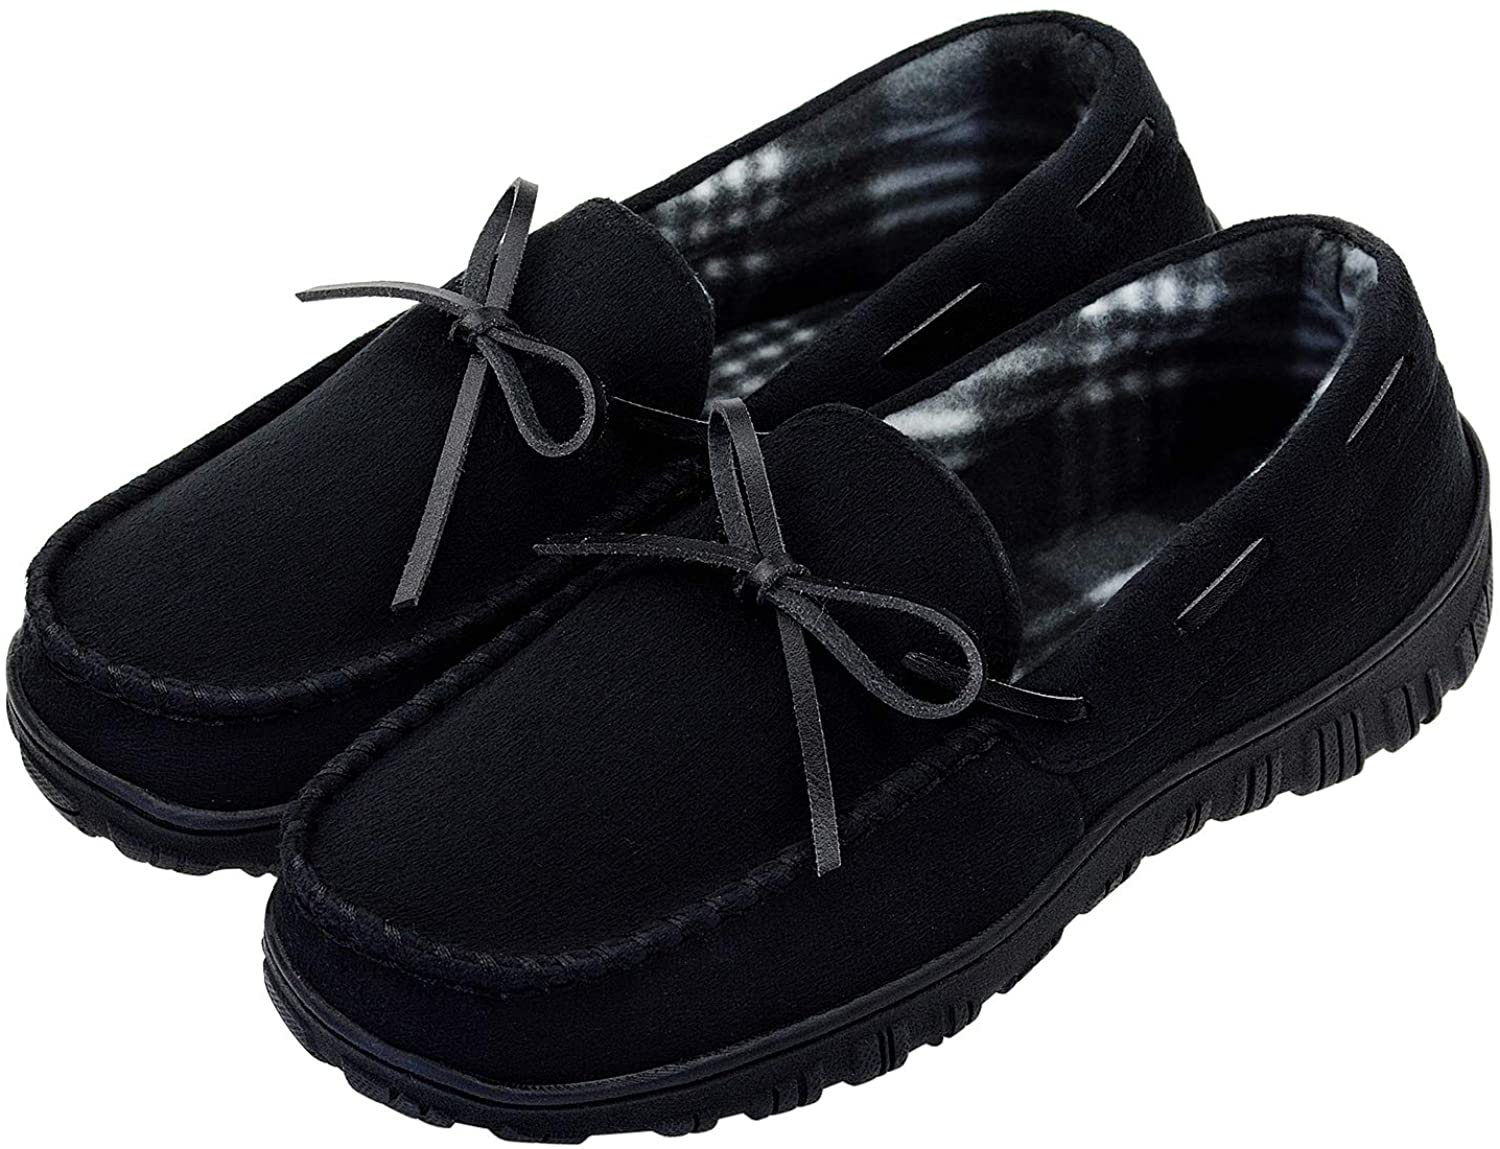 LseLom Mens-Slippers-Moccasin-Microsuede-Slip-on-Indoor-Outdoor House Slippers Memory Foam House Shoes